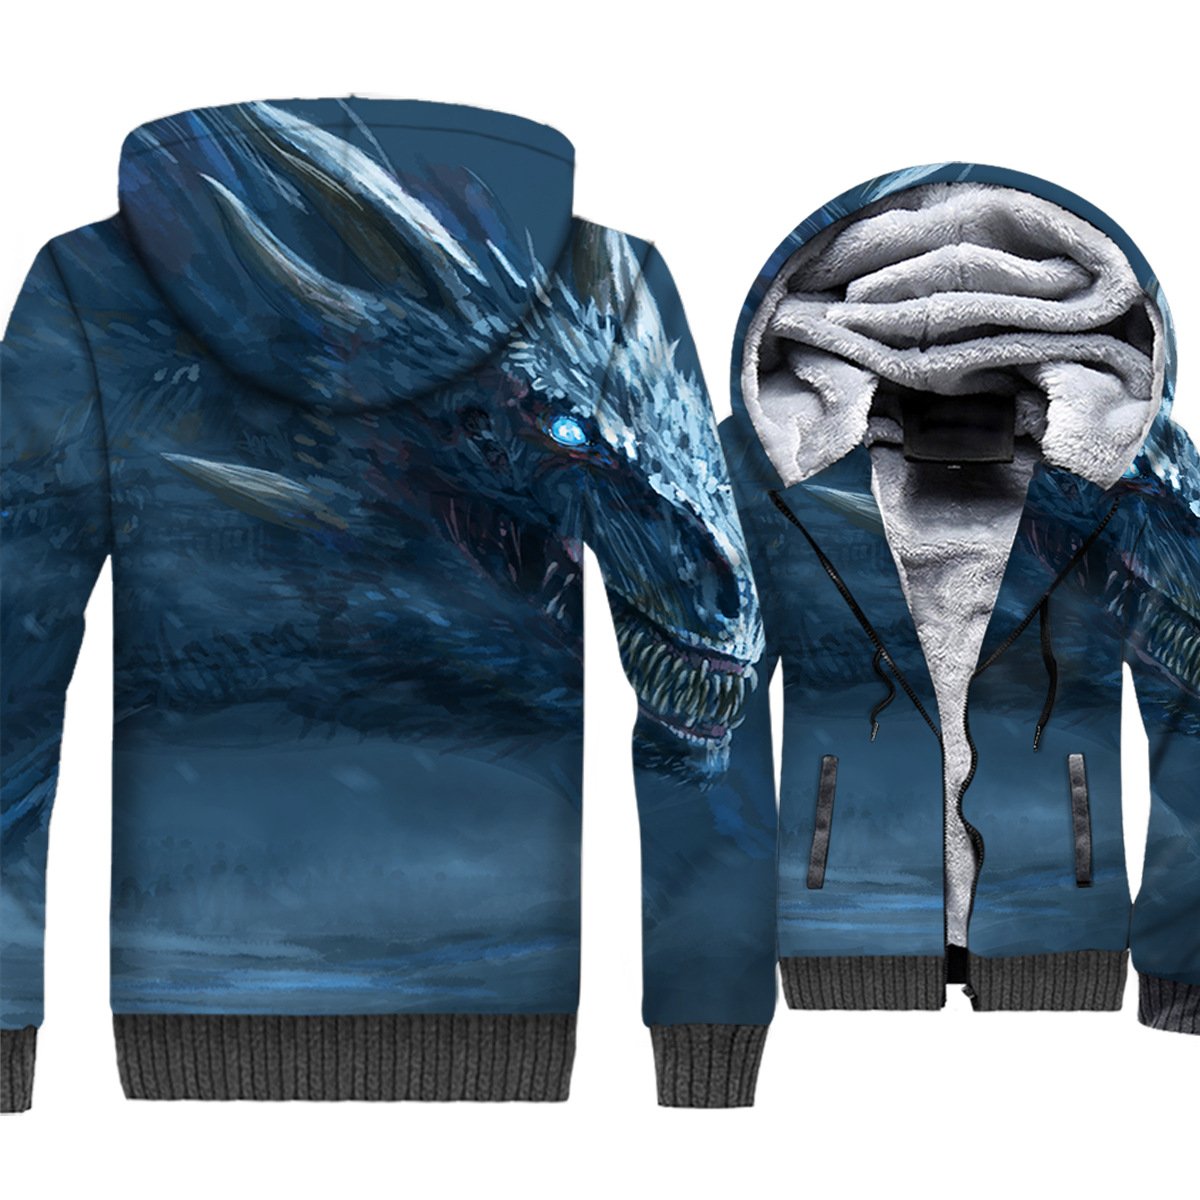 Game of Thrones Jackets - Game of Thrones Series Ice Dragon Super Cool 3D Fleece Jacket